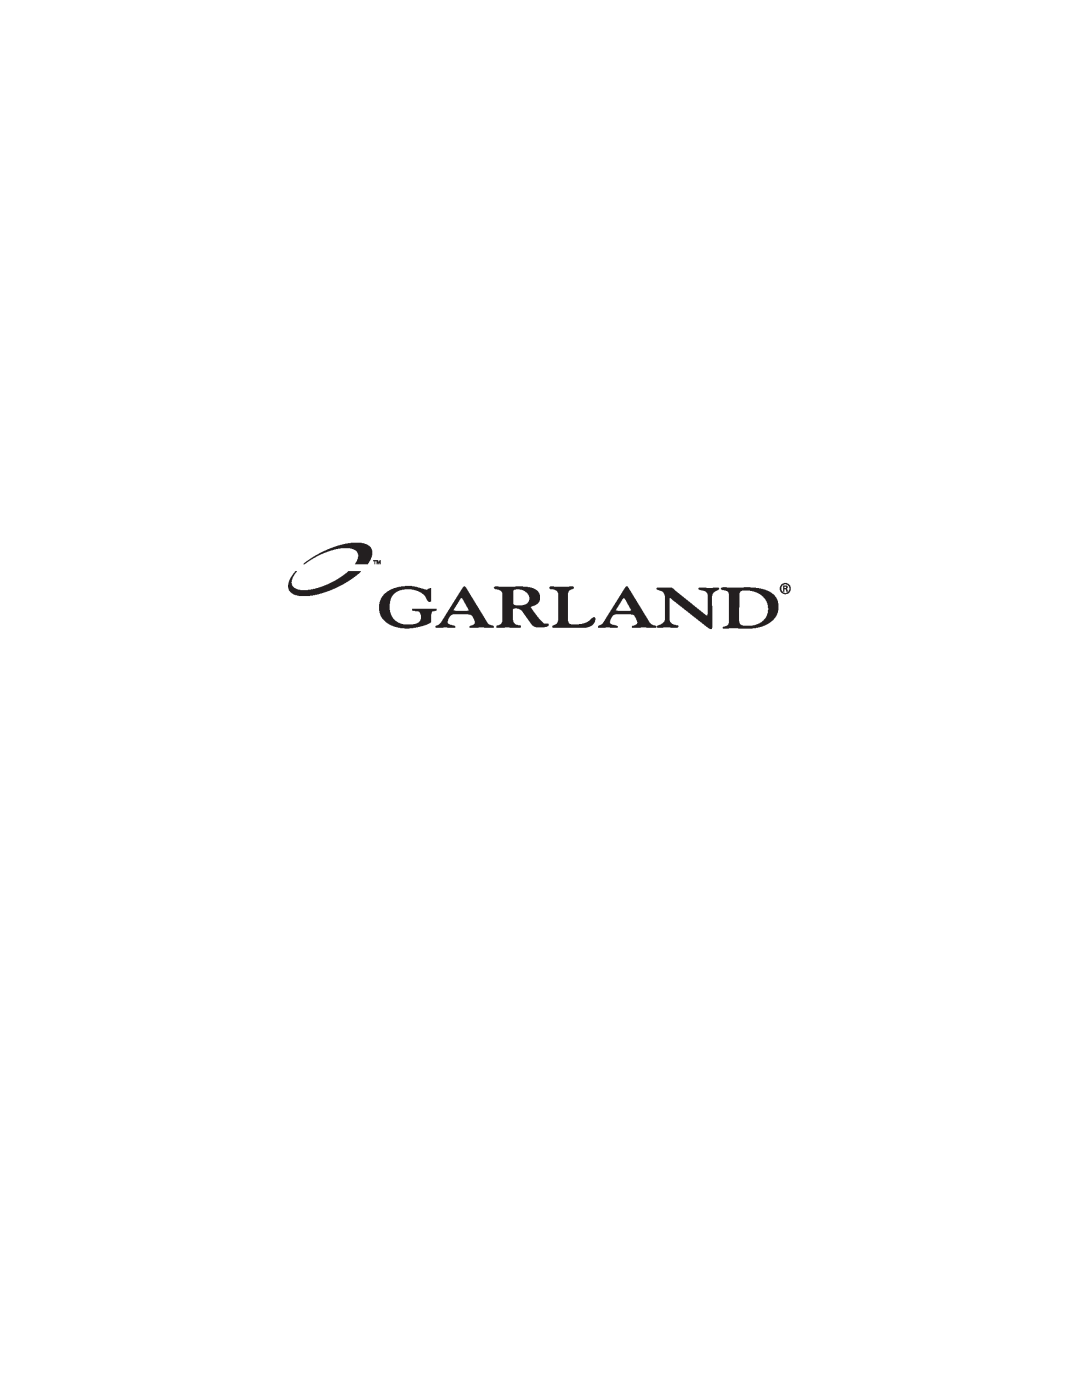 Garland Convection Microwave Oven installation instructions 